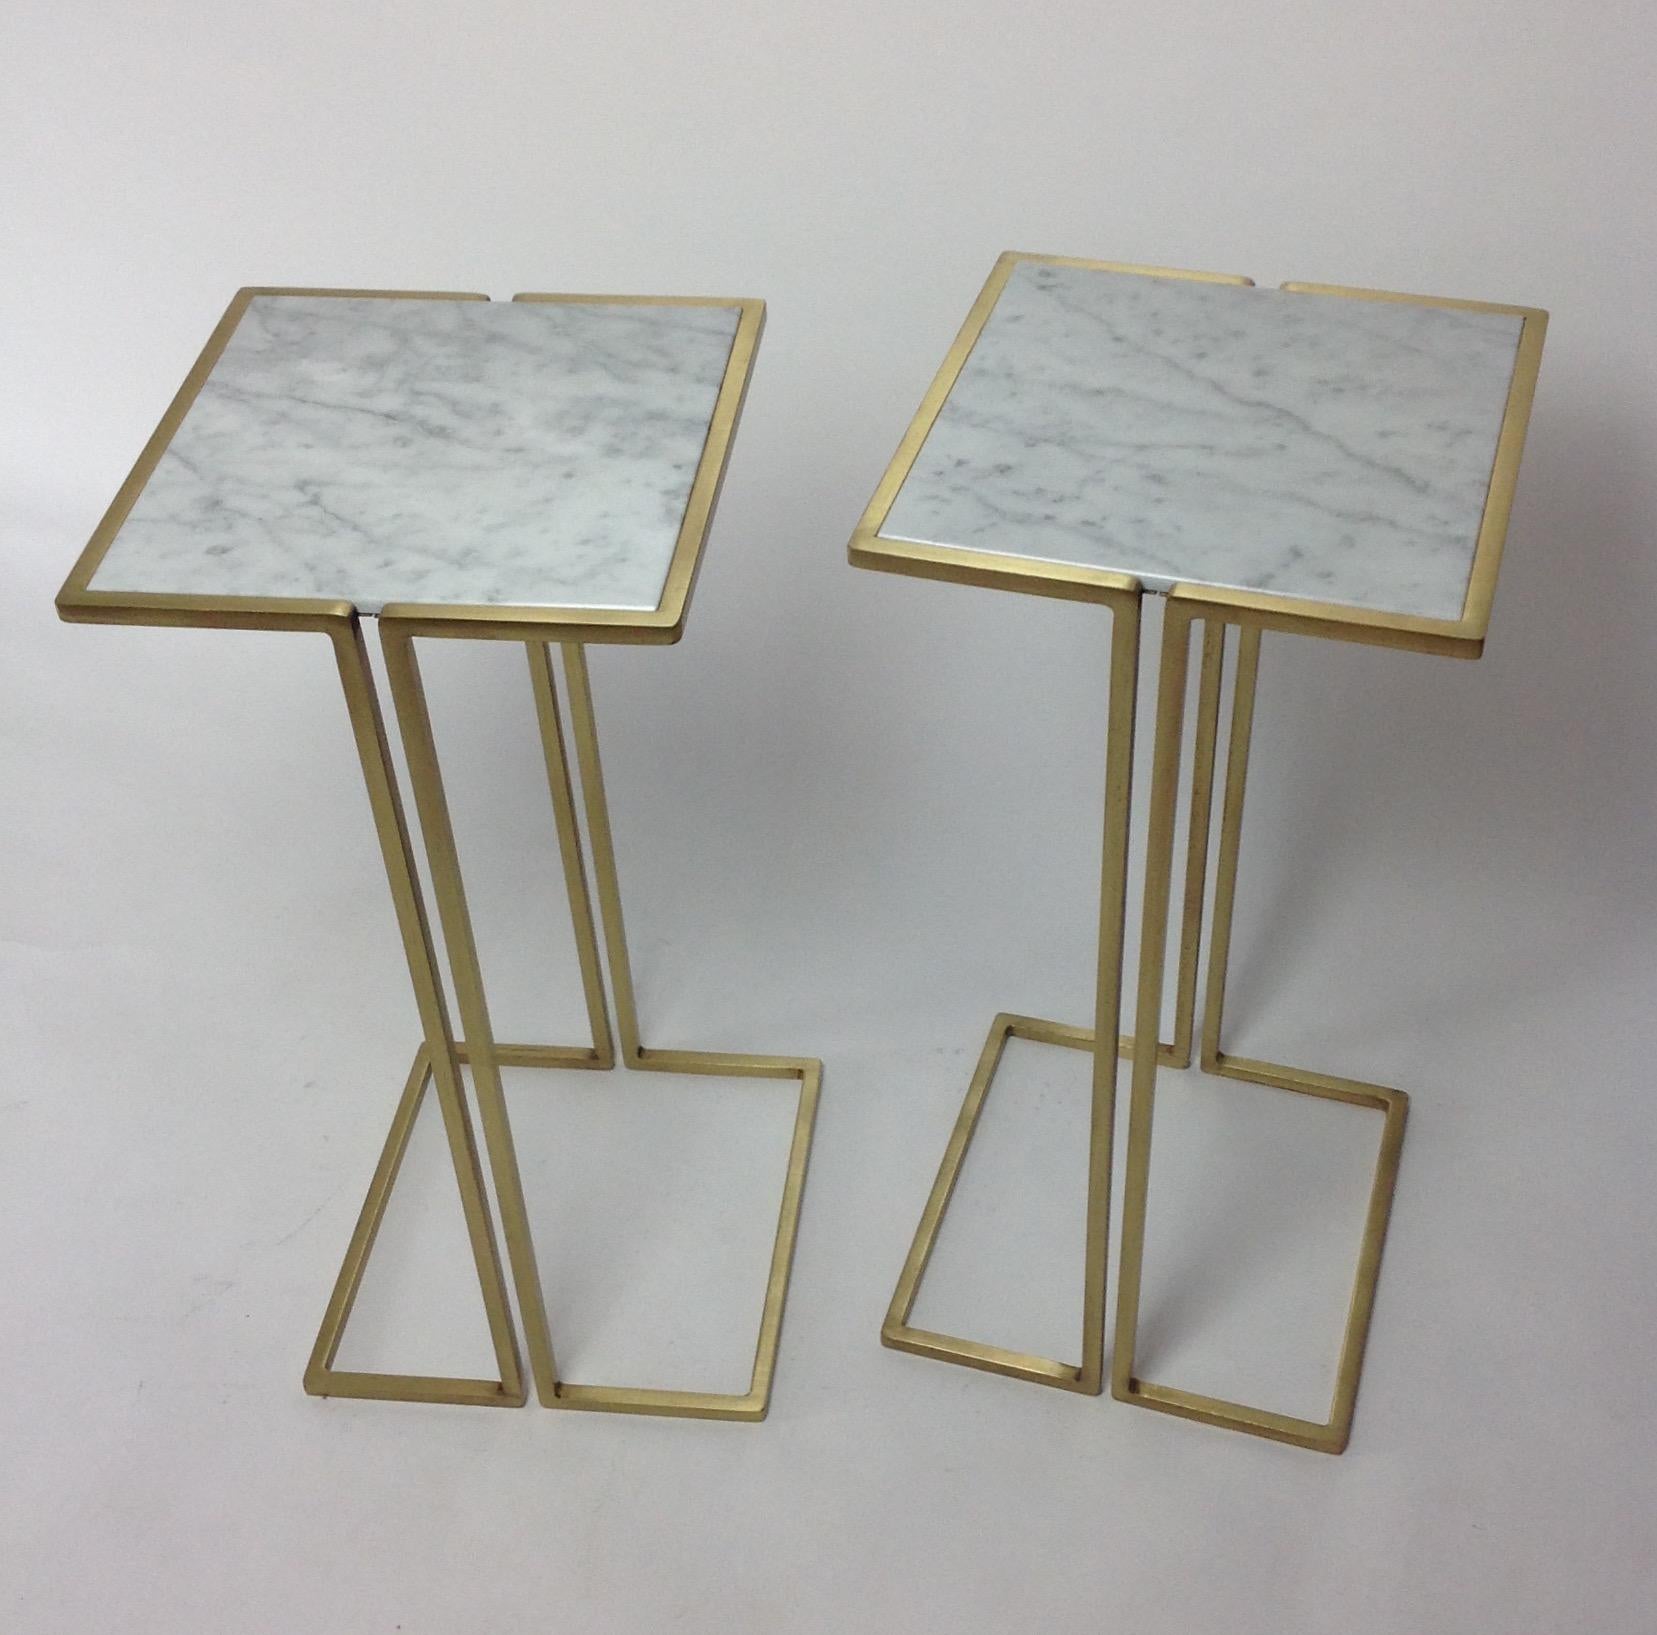 Small-scale side tables which have a Minimalist design with a satin brass plated frames and marble tops. They are versatile tables, perfect for cocktails or laptops. They can also work nicely as bedside tables. These side tables nestle nicely around